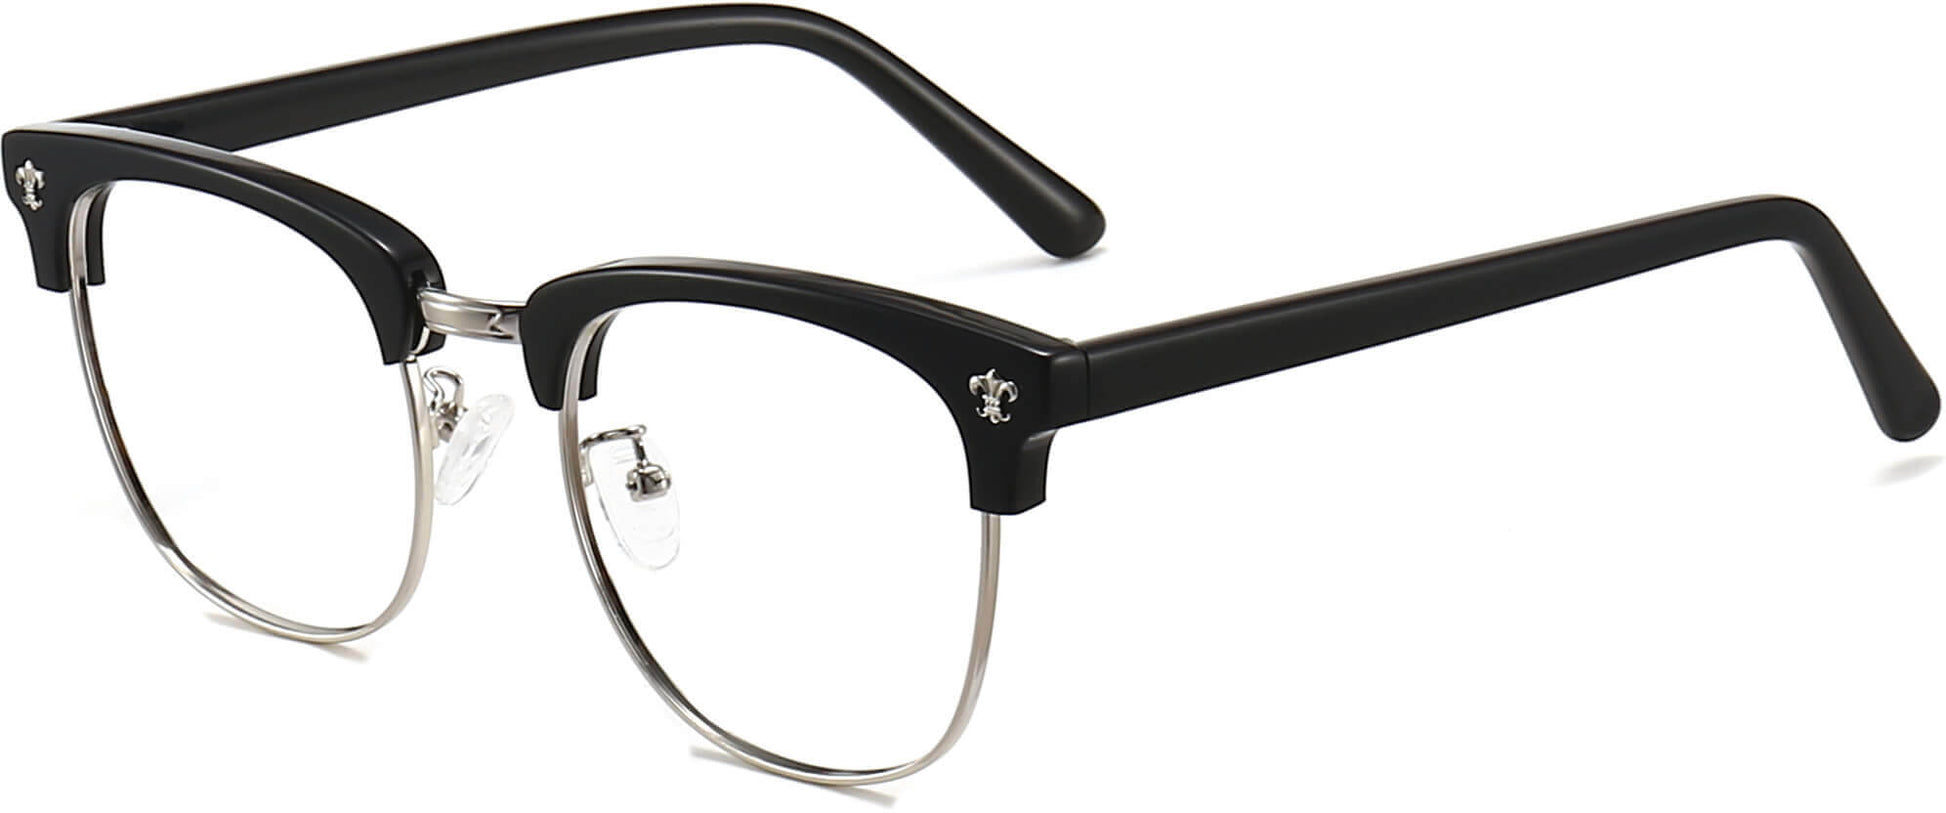 Colin Browline Black Eyeglasses from ANRRI, angle view